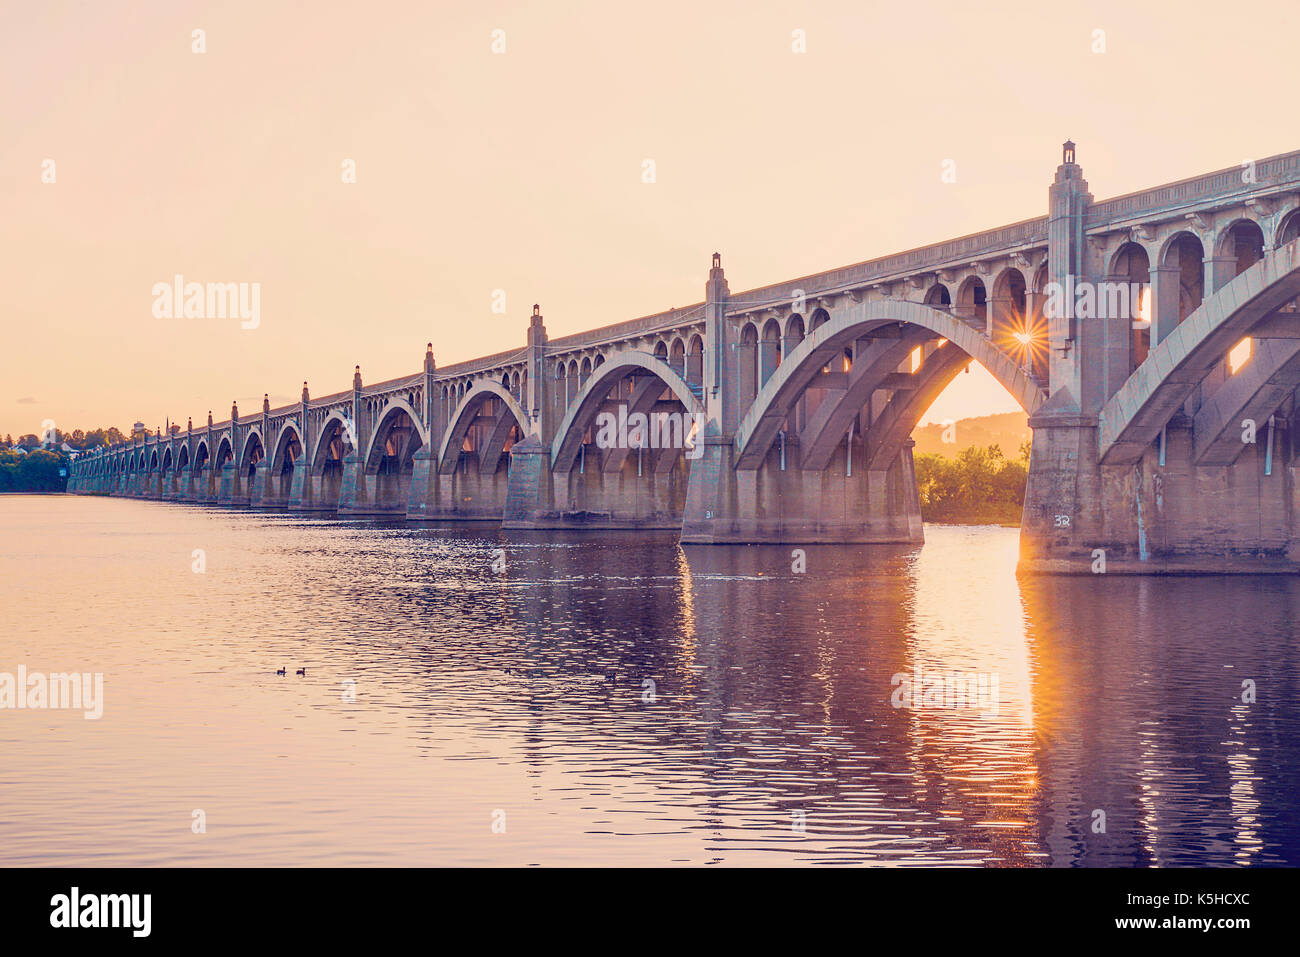 Veterans Memorial Bridge spanning the Susquehanna River between Wrightsville PA and Columbia PA Stock Photo